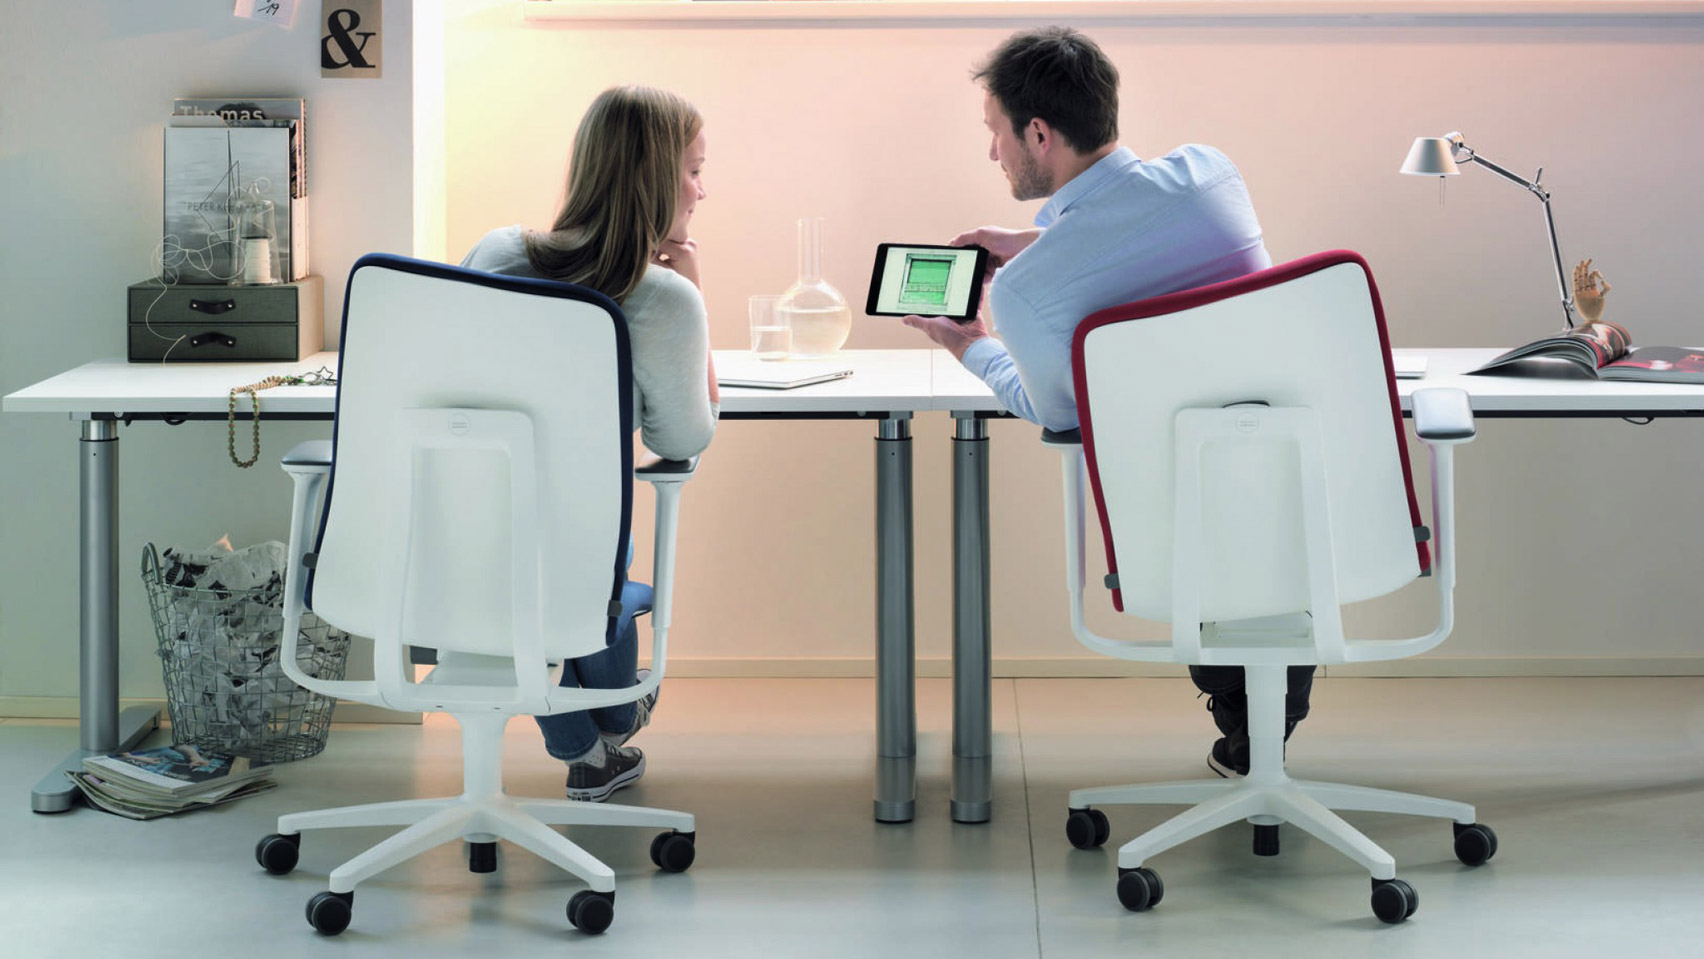 Wilkahn AT 187 chair promotes dynamic sitting to prevent backaches